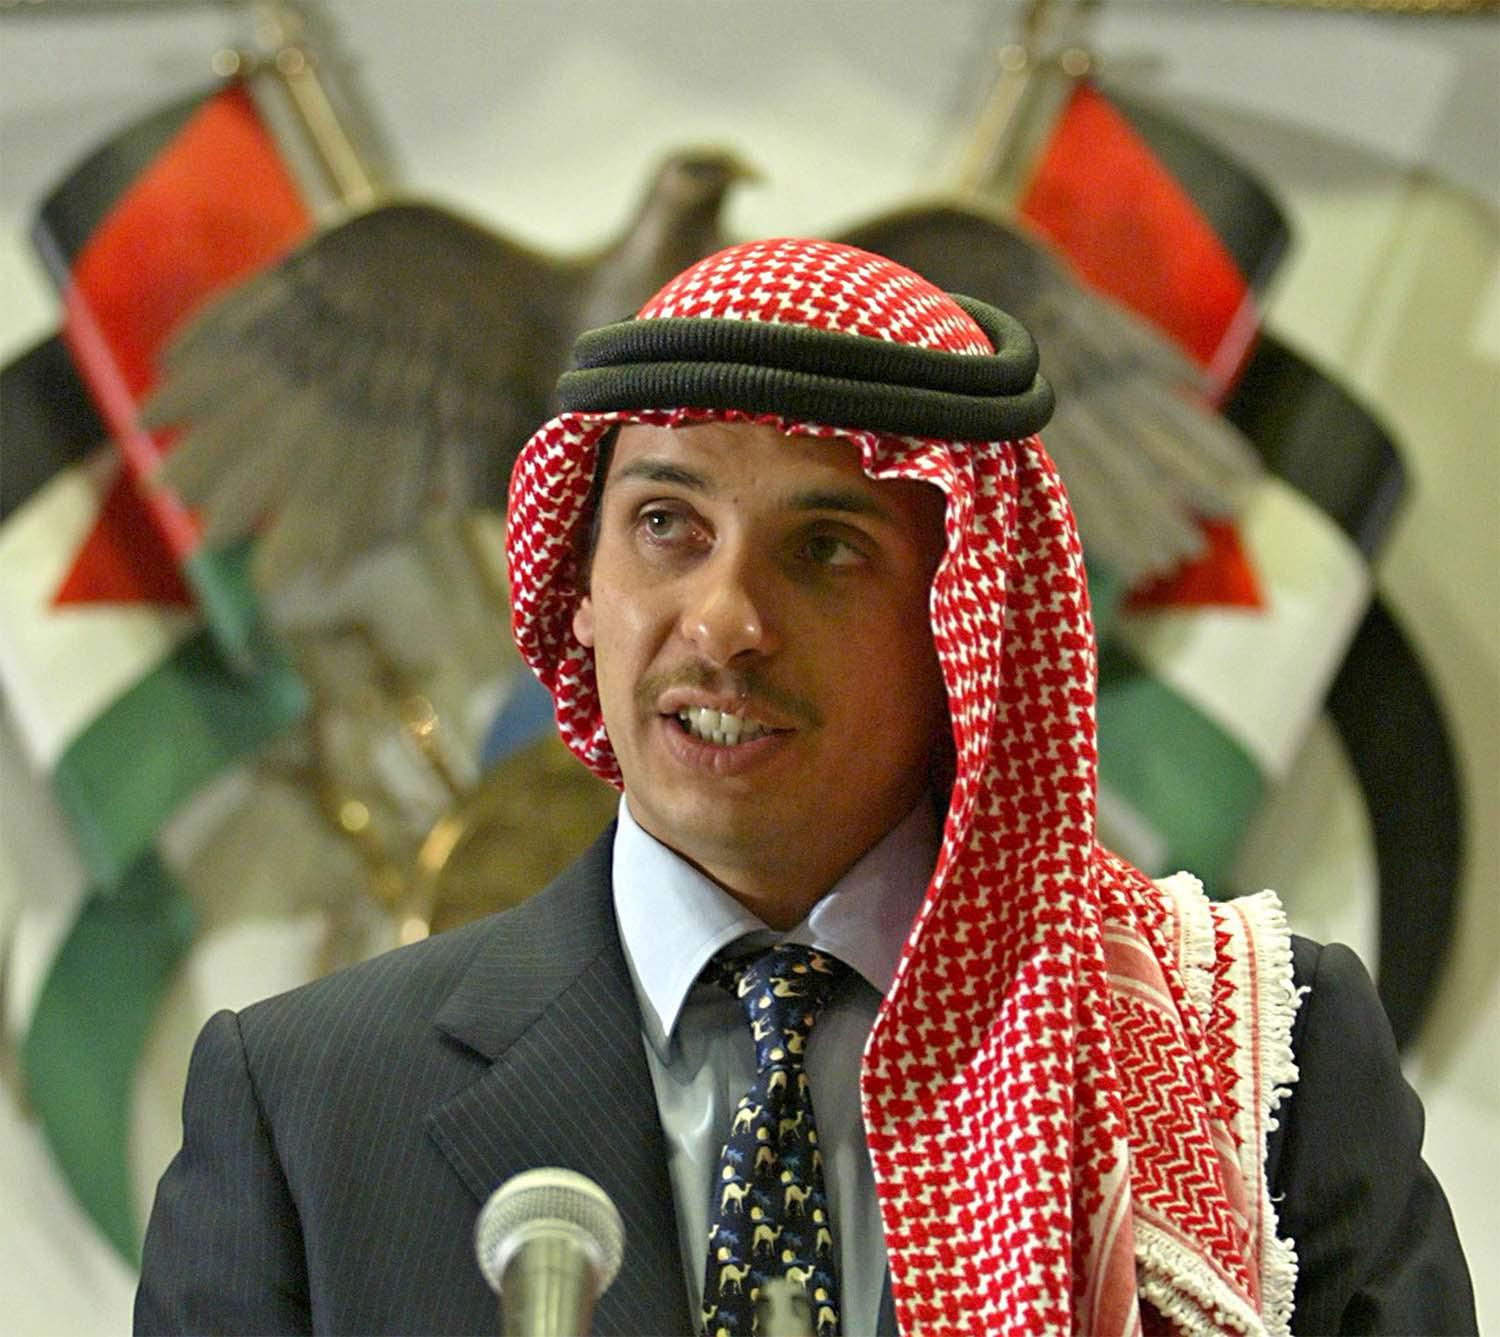 It is unclear why Jordan decided to crack down on Prince Hamza now